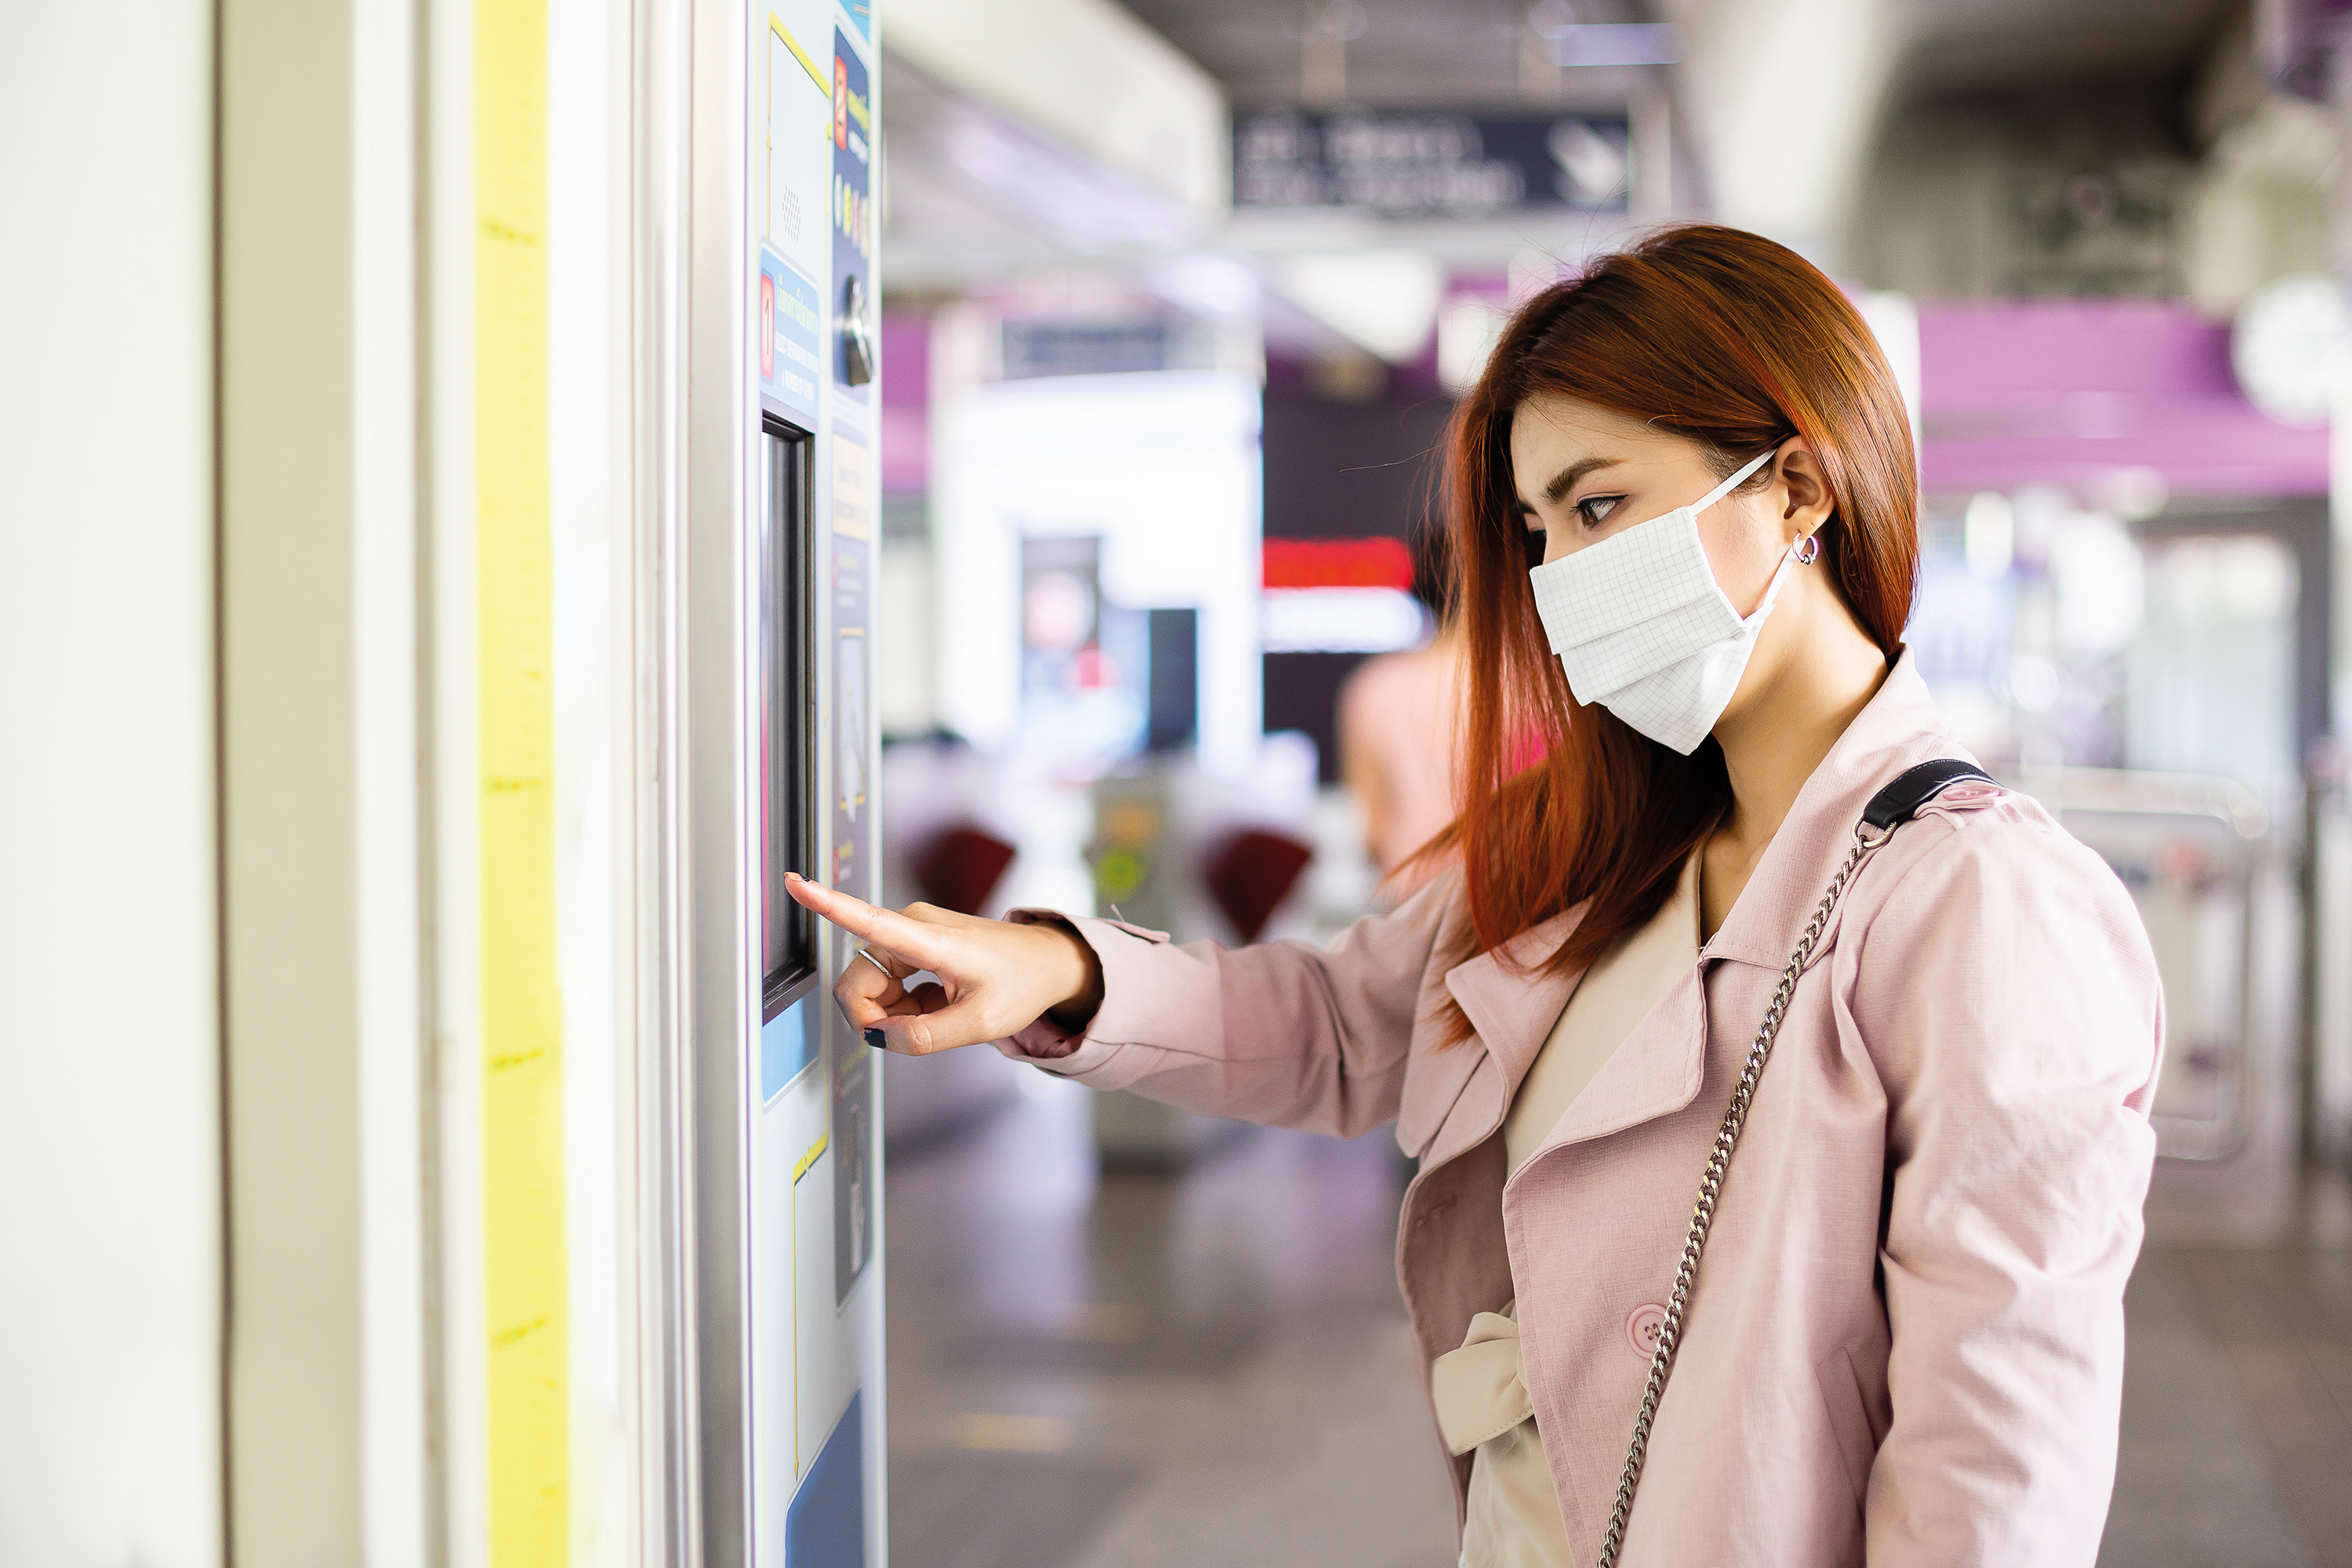 Touchscreens in public areas such as ticket machines quickly become transmitters of bacteria and germs. The "CleanScreen" project is intended to provide a remedy